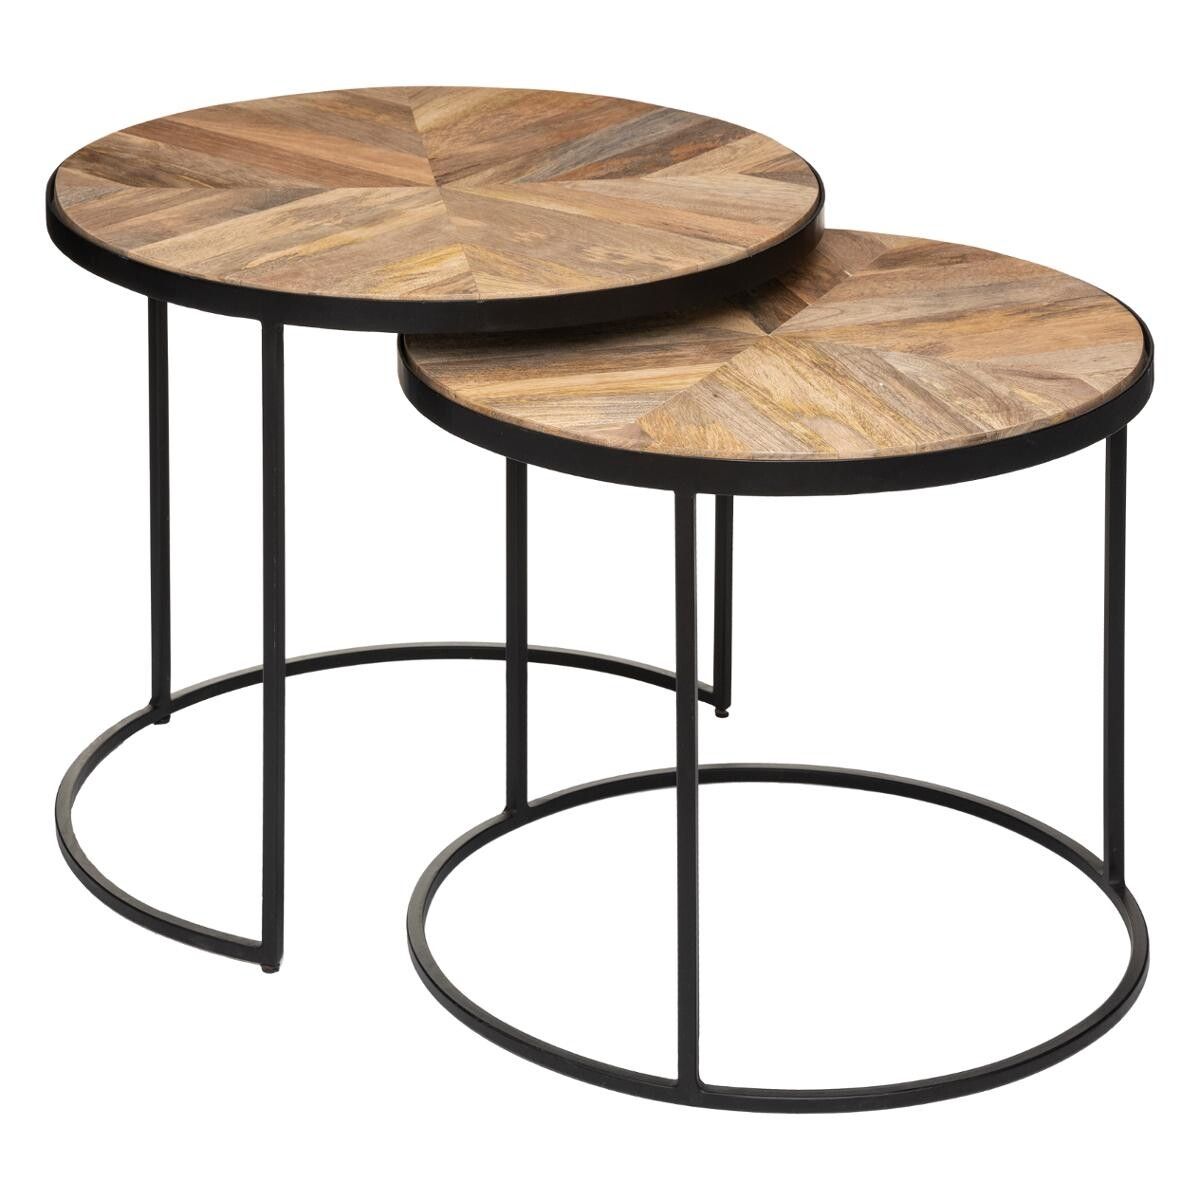 Basile Black Metal And Natural Mango Wood Coffee Tables – Atmosphera  Official Website Intended For Mango Wood Coffee Tables (View 1 of 20)